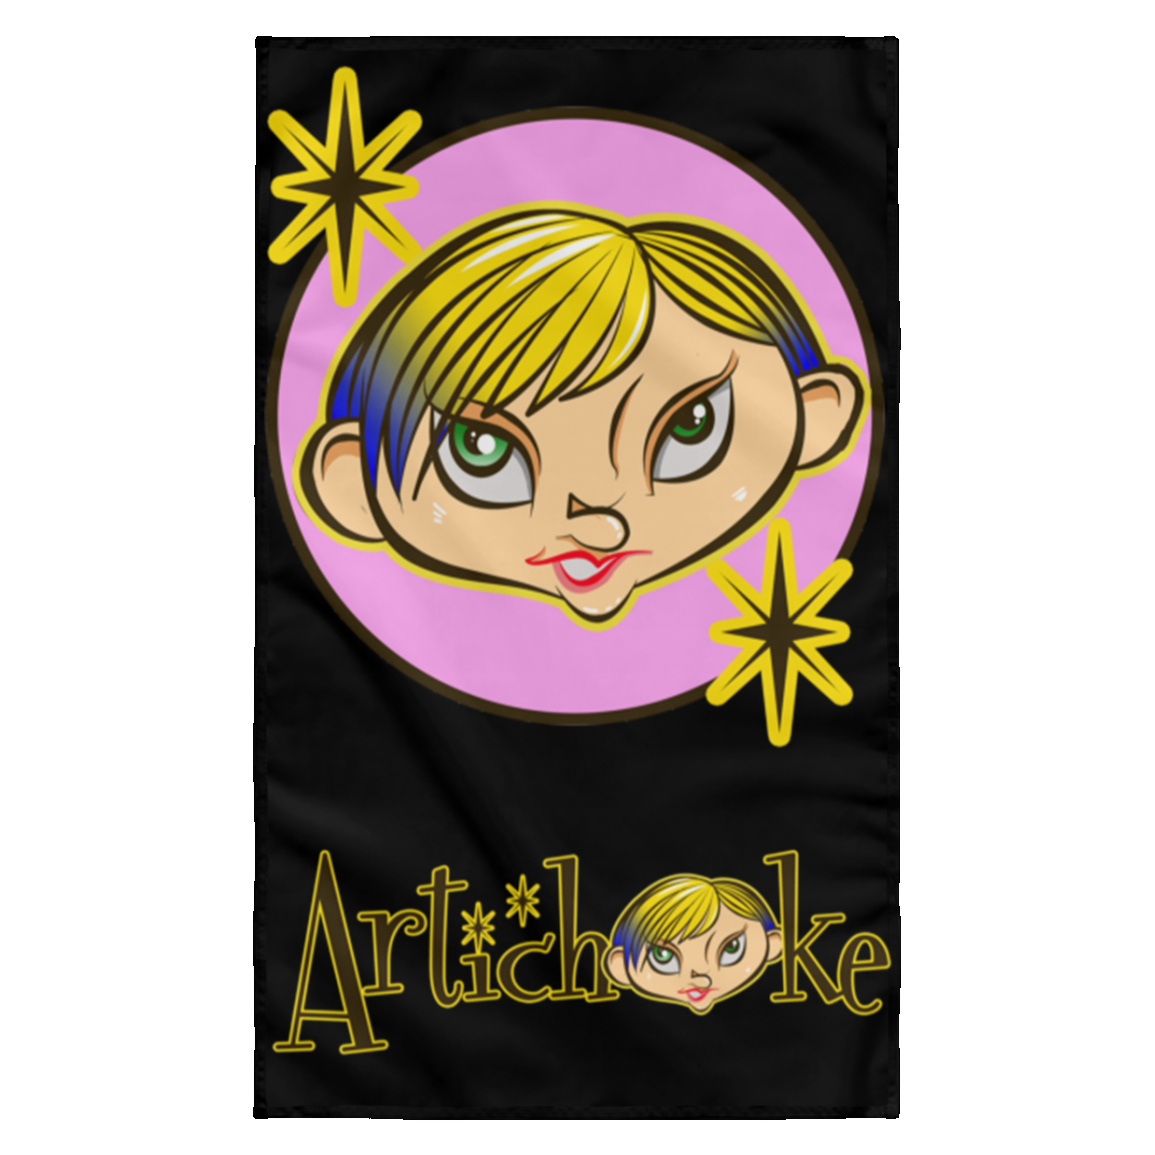 ArtichokeUSA Character and Font design #21. Friends, Clients, and People of Earth. Let's Create Your Own Design Today. Wall Flag